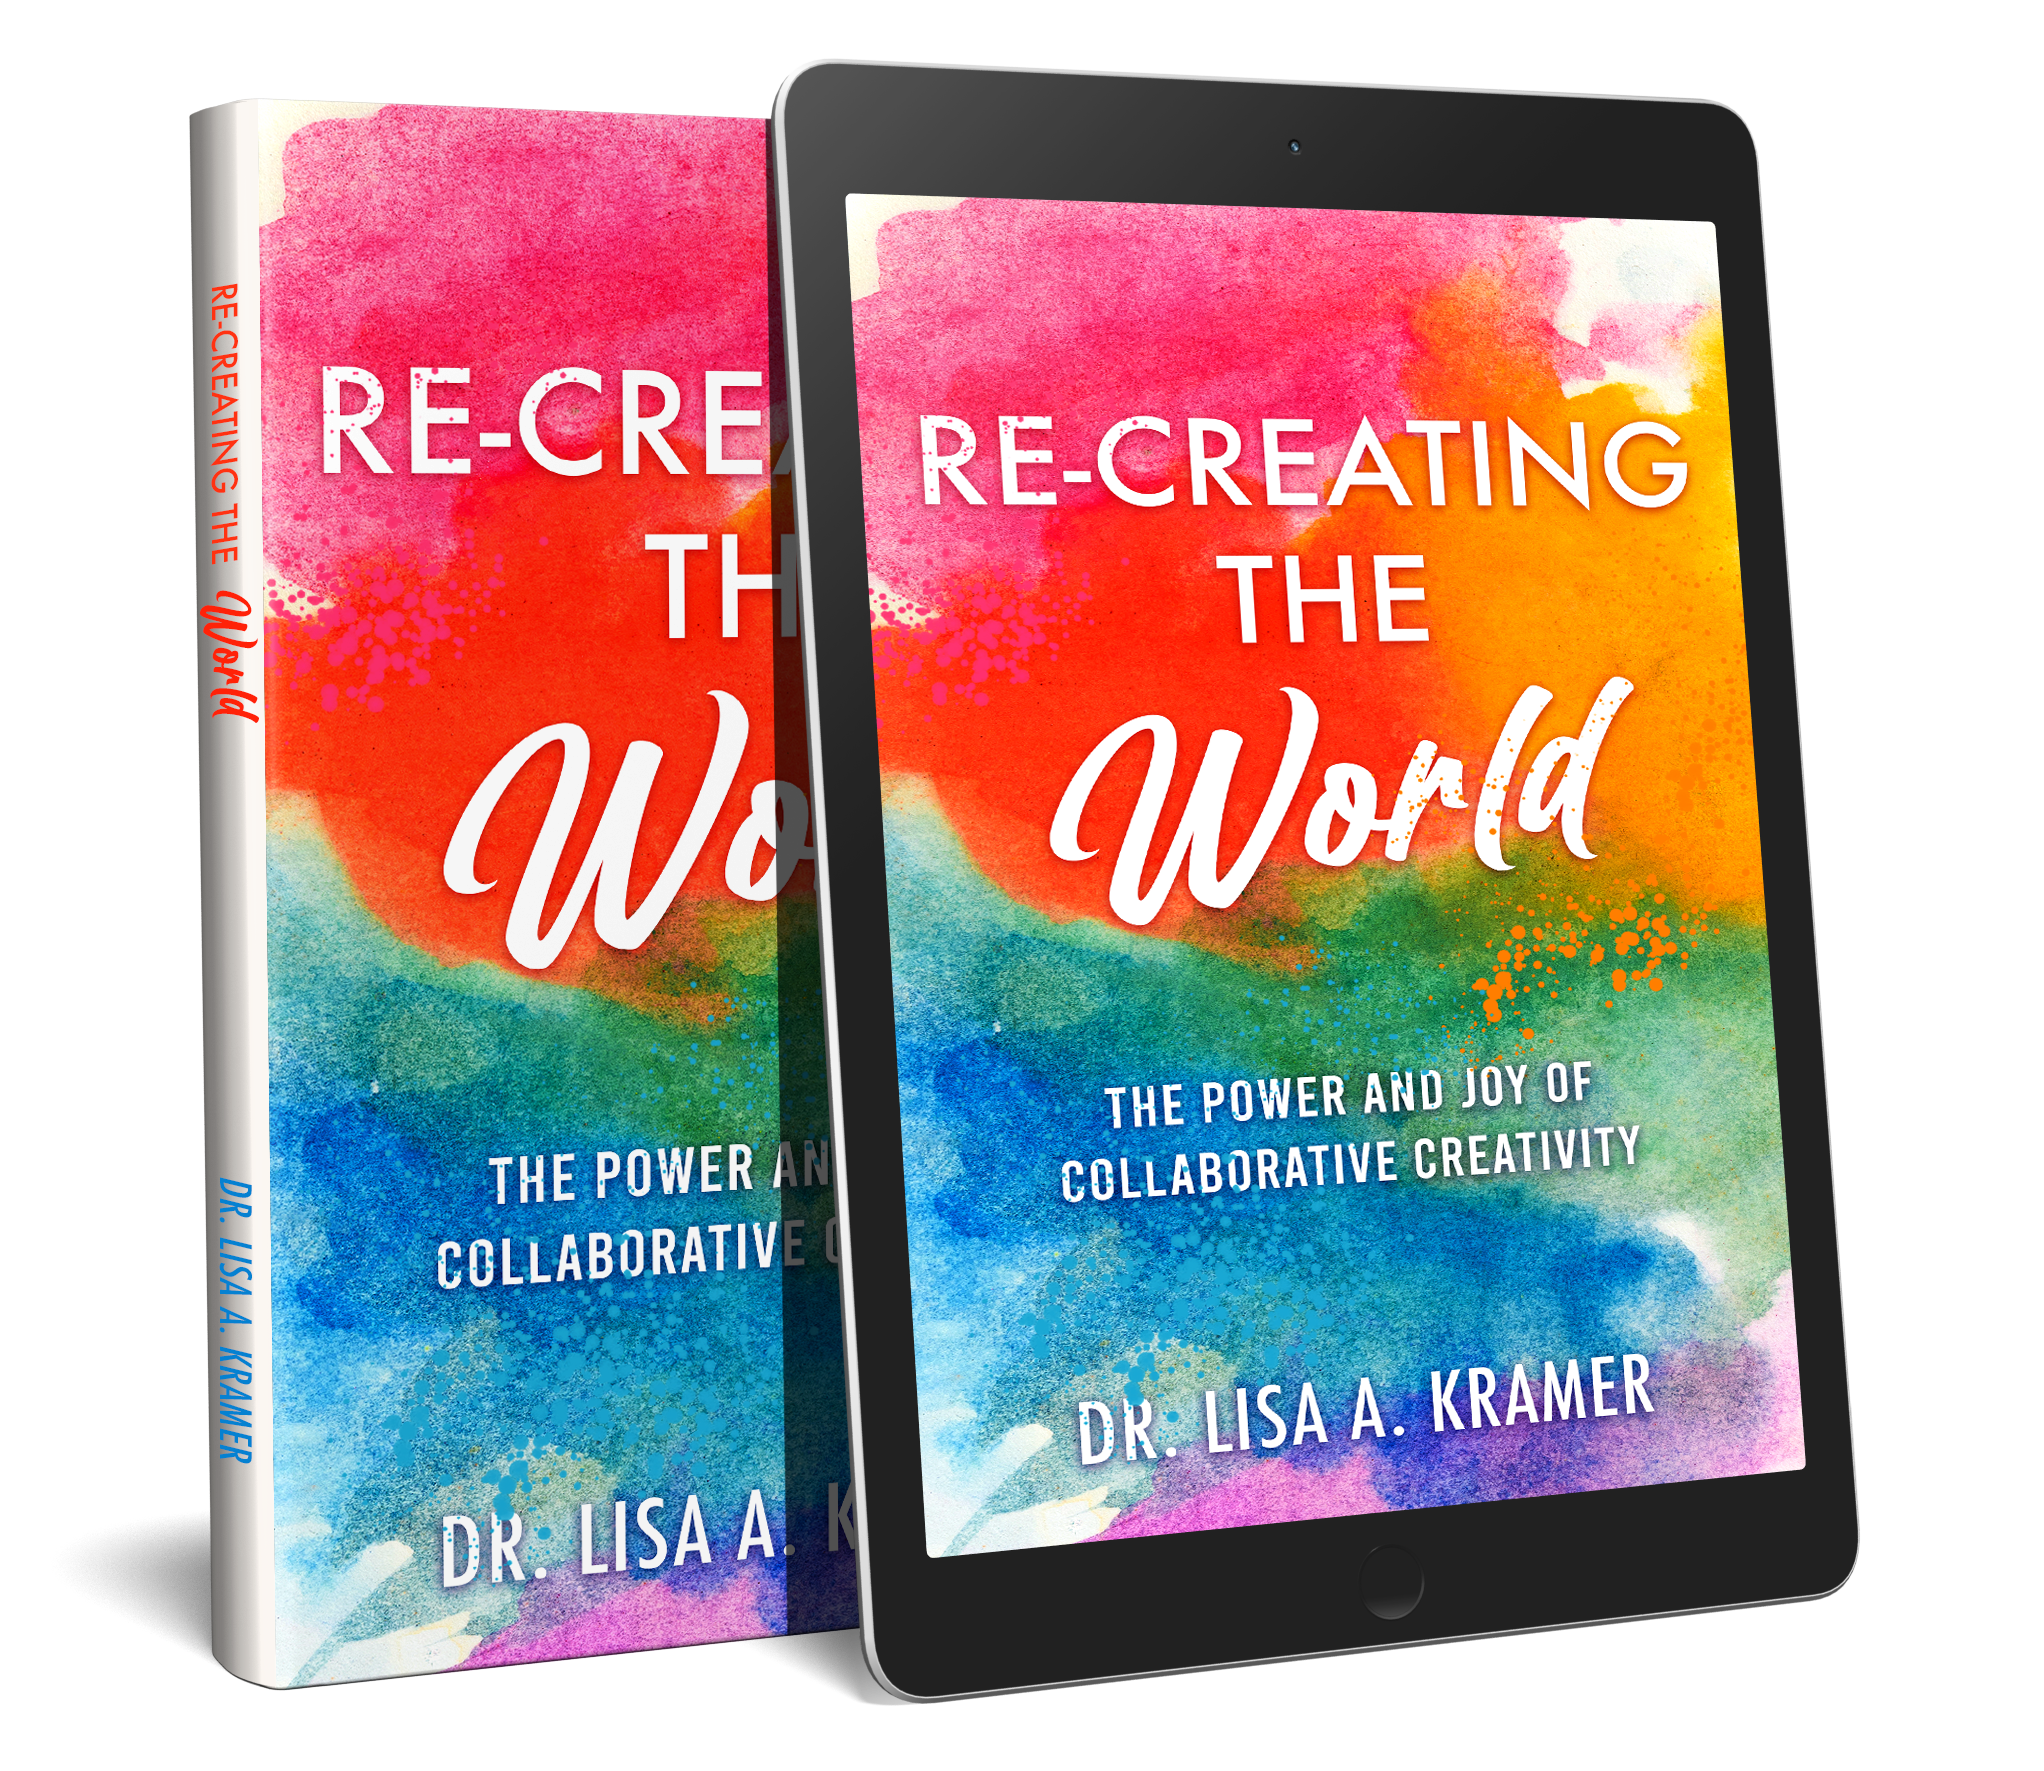 An image of Re-Creating the World book covers